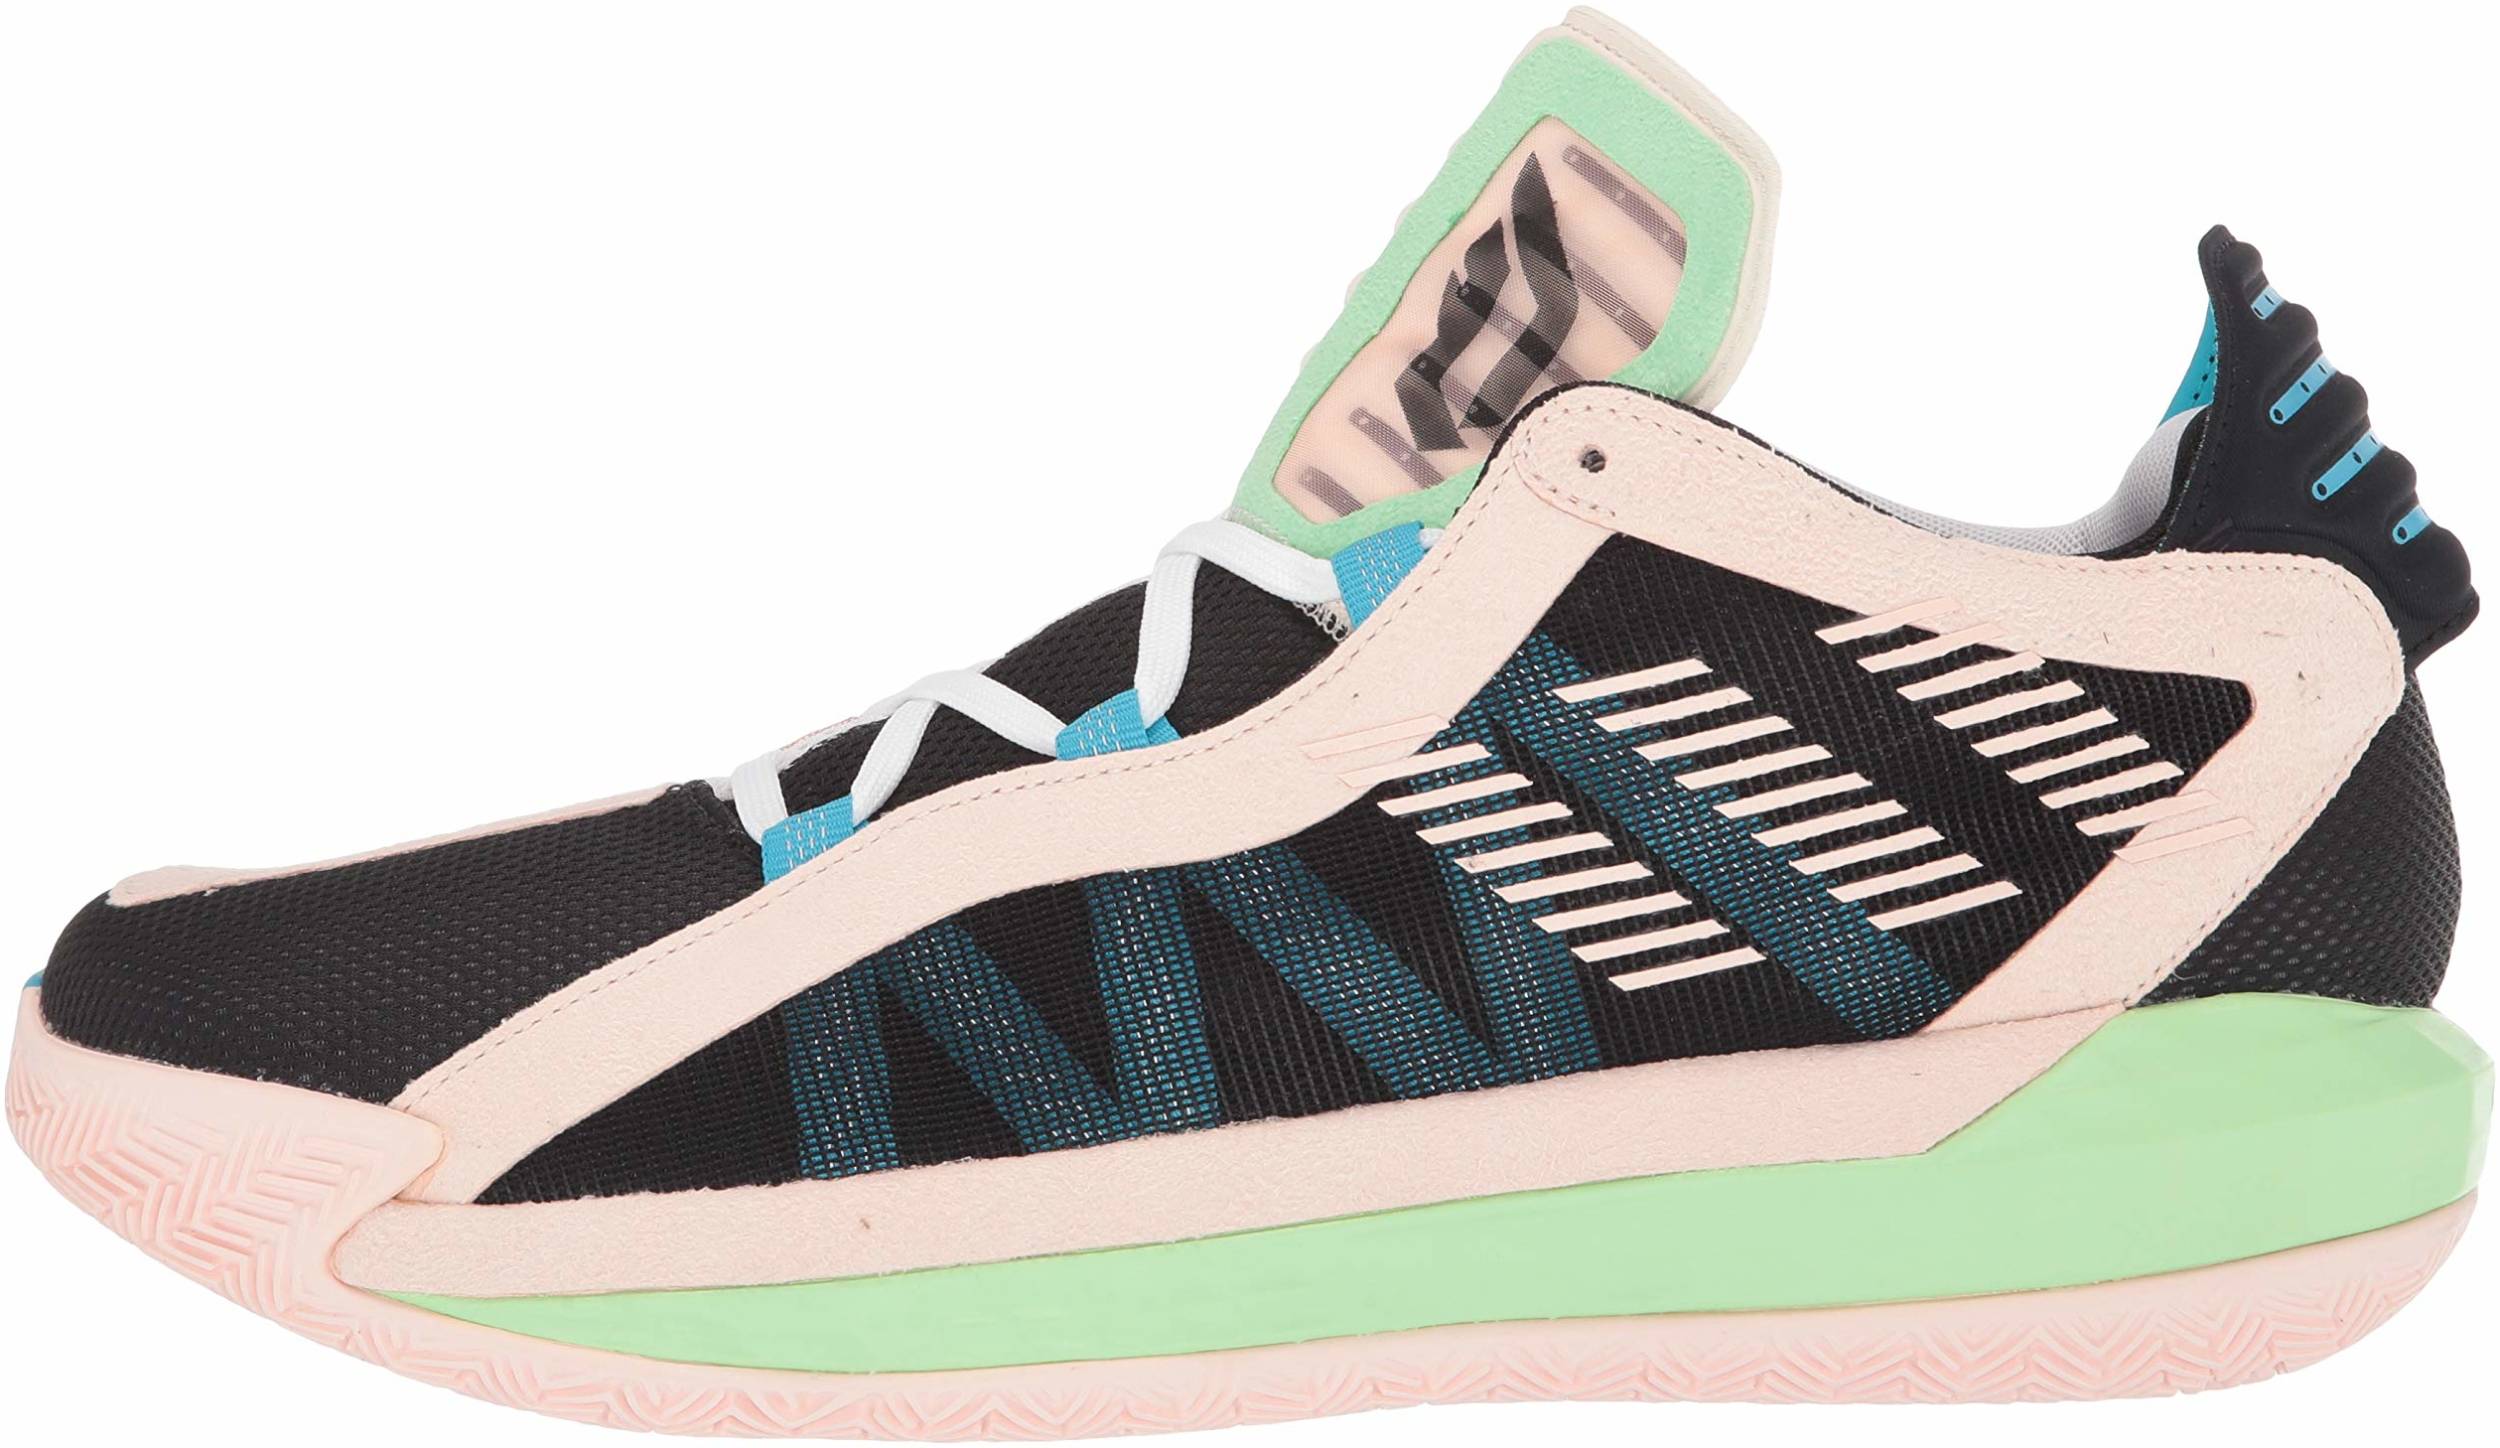 Adidas Dame 6 - Deals ($34), Facts 